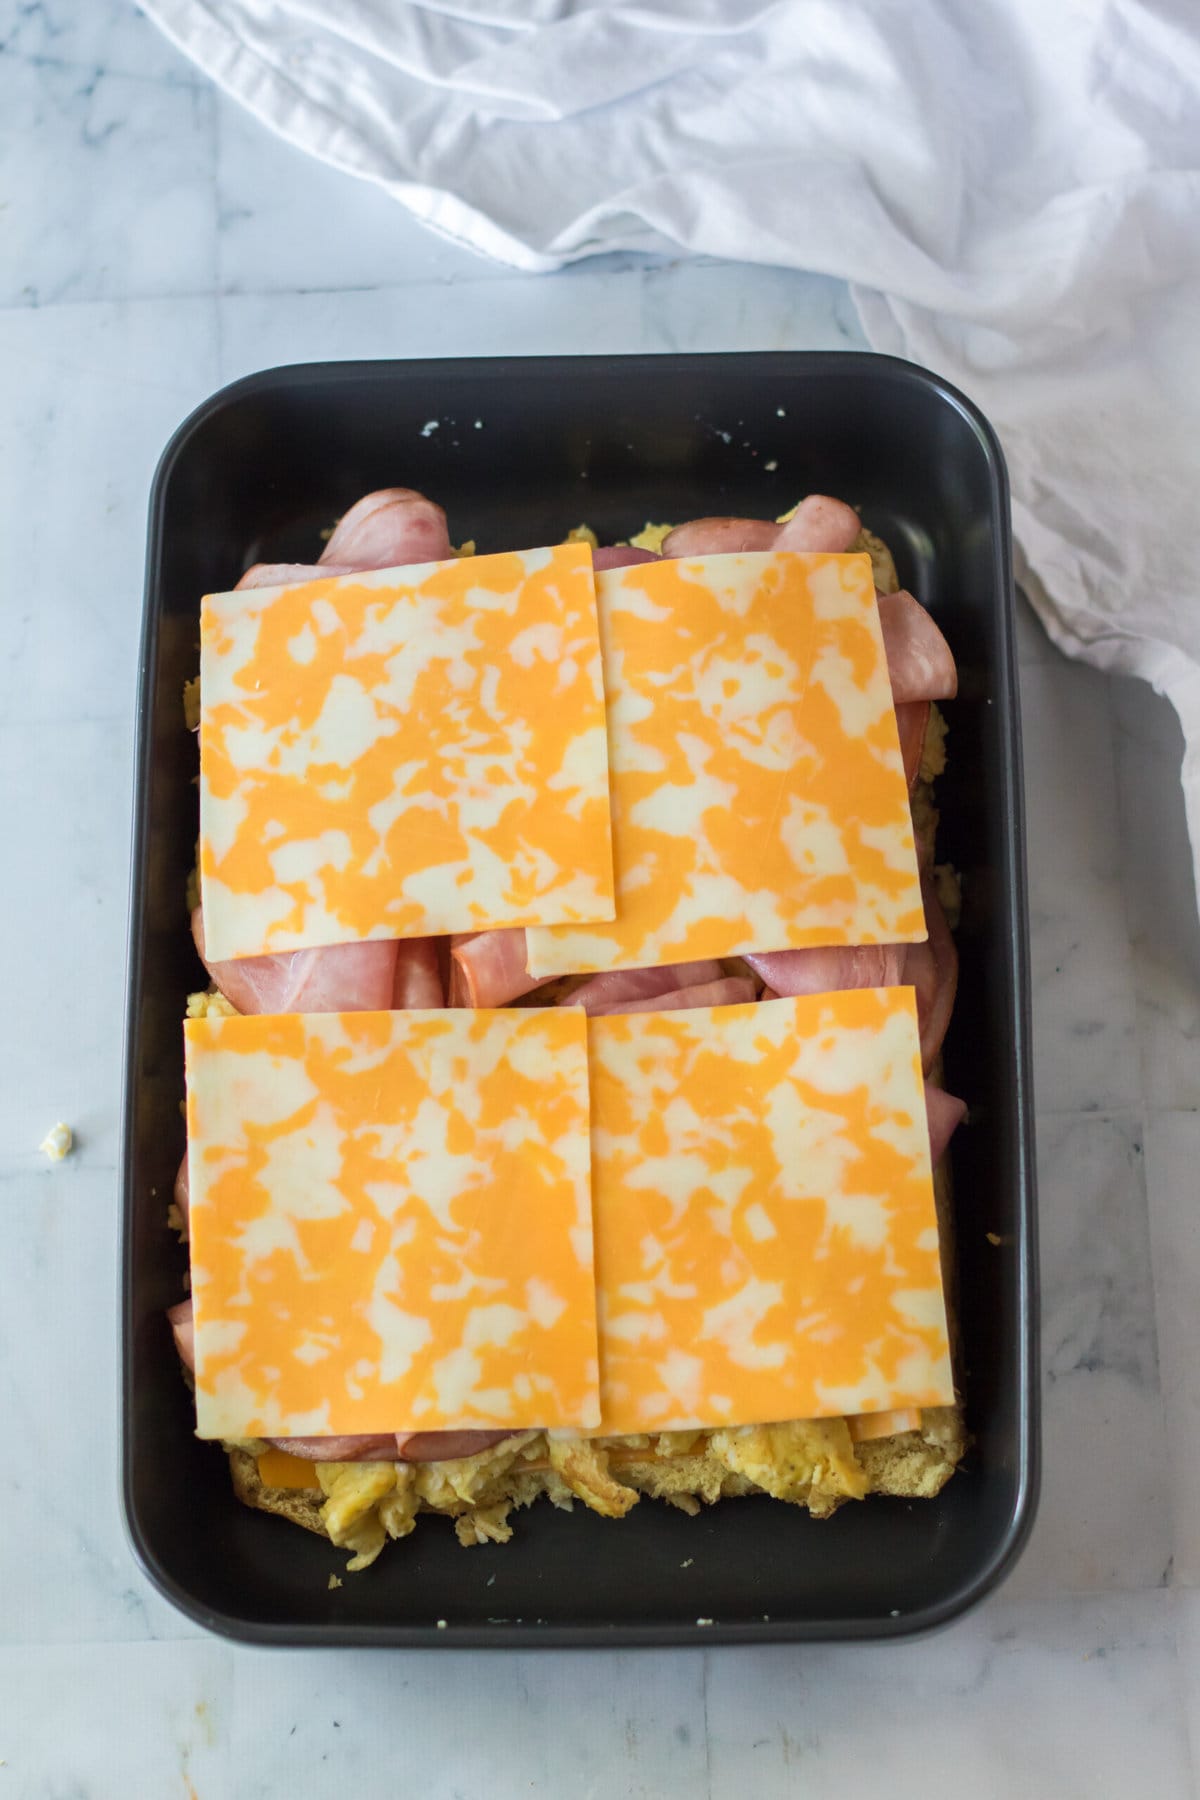 Adding the second layer of cheese.